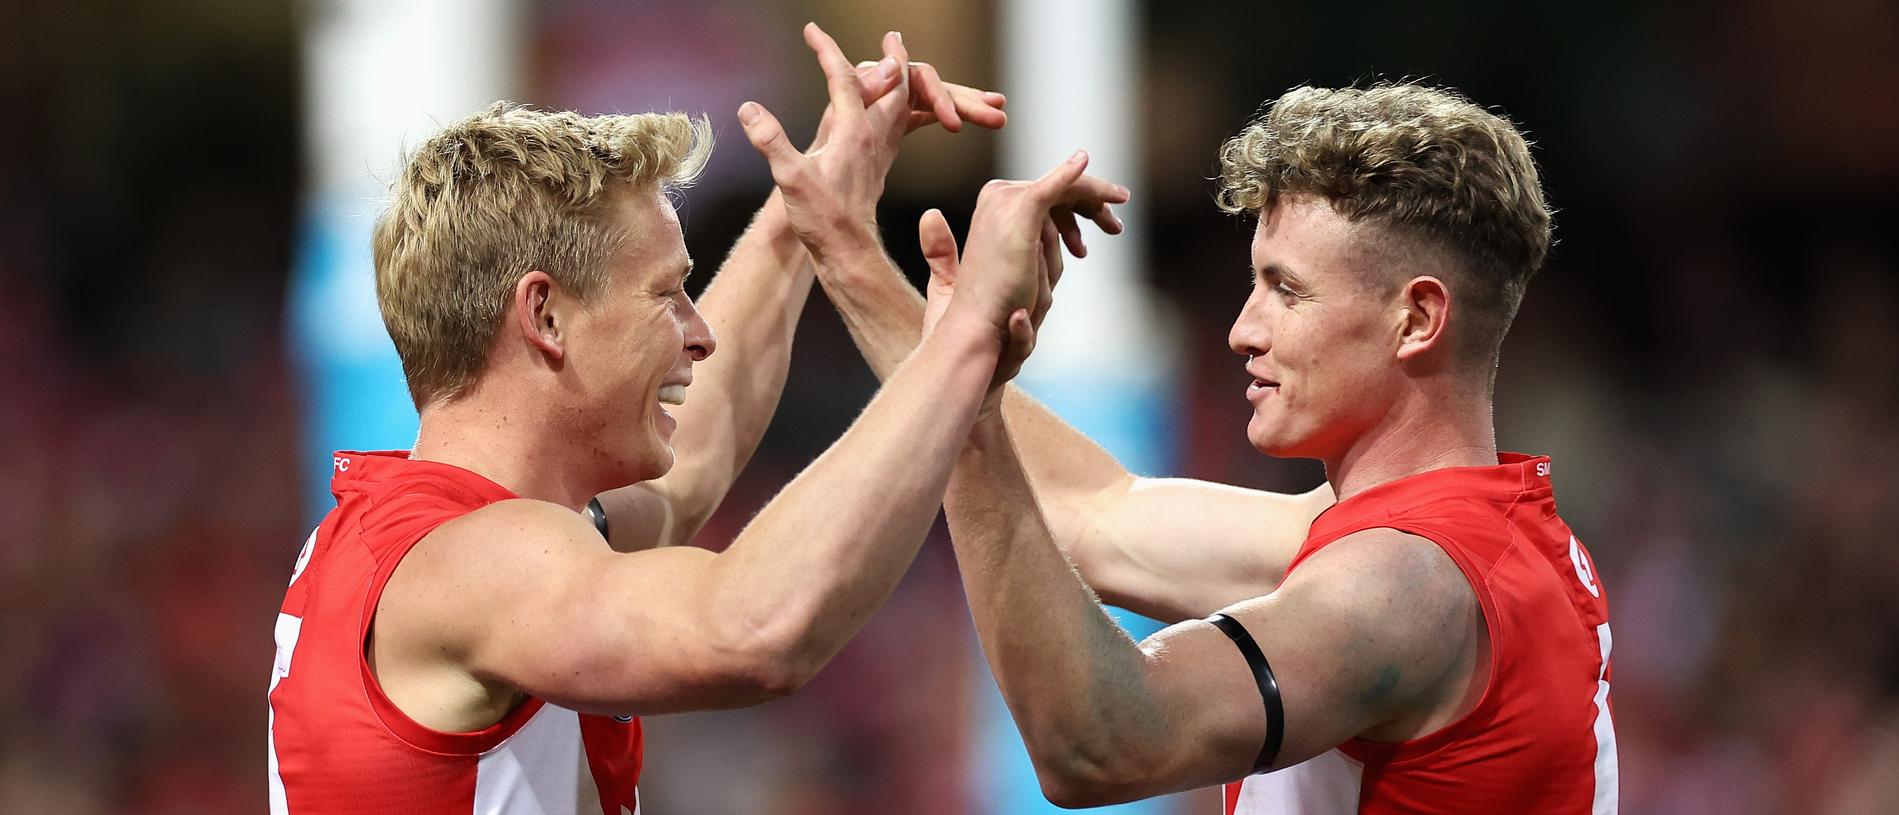 SYDNEY, AUSTRALIA - JUNE 24: IsaacÂ Heeney of the Swans 
celebrates kicking a goal with ChadÂ Warner of the Swans during the round 15 AFL match between Sydney Swans and West Coast Eagles at Sydney Cricket Ground, on June 24, 2023, in Sydney, Australia. (Photo by Cameron Spencer/Getty Images)